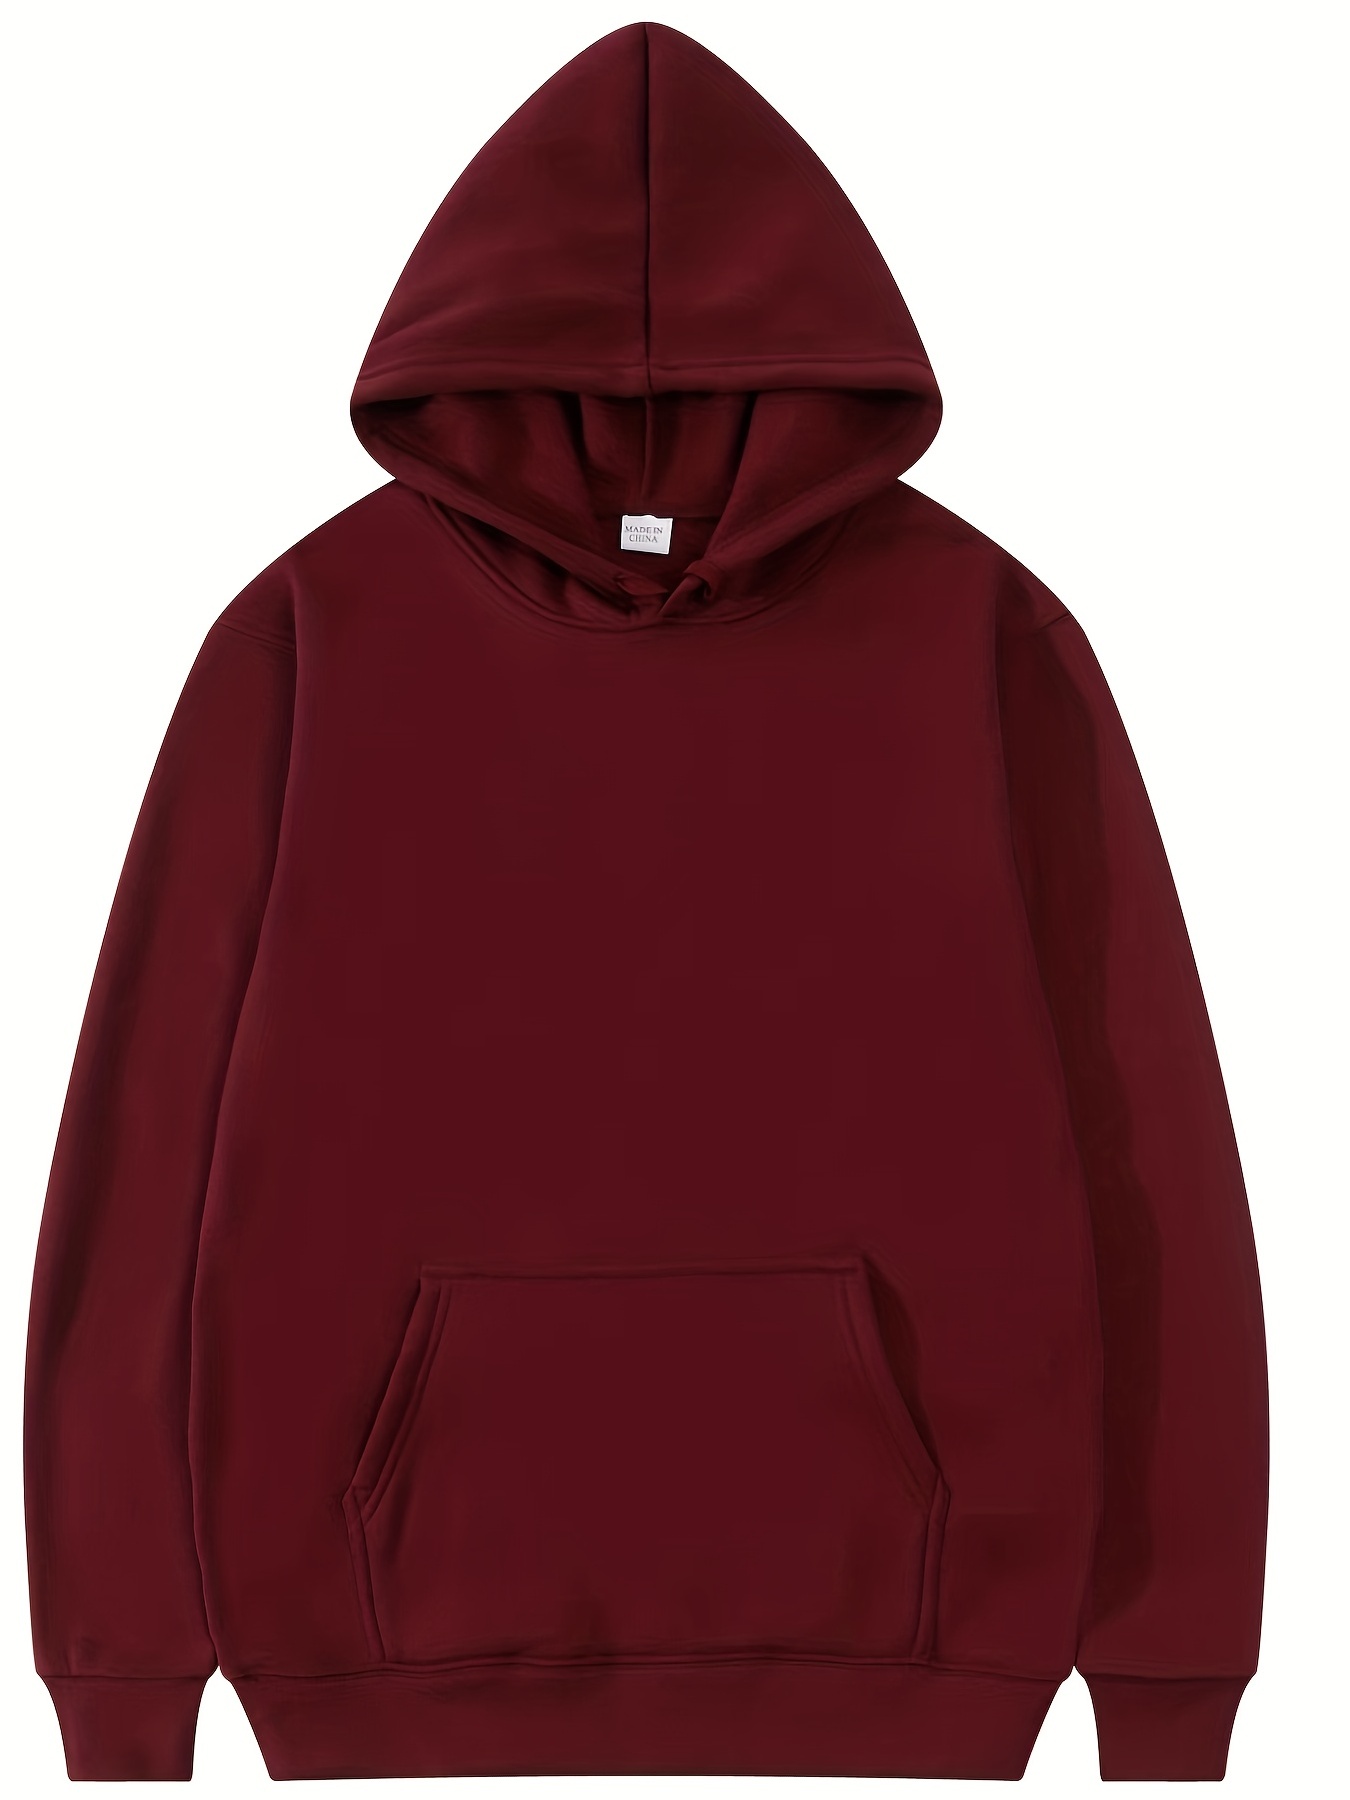 Men's Solid Color Hoodies Casual Loose Fit Drawstring Hooded